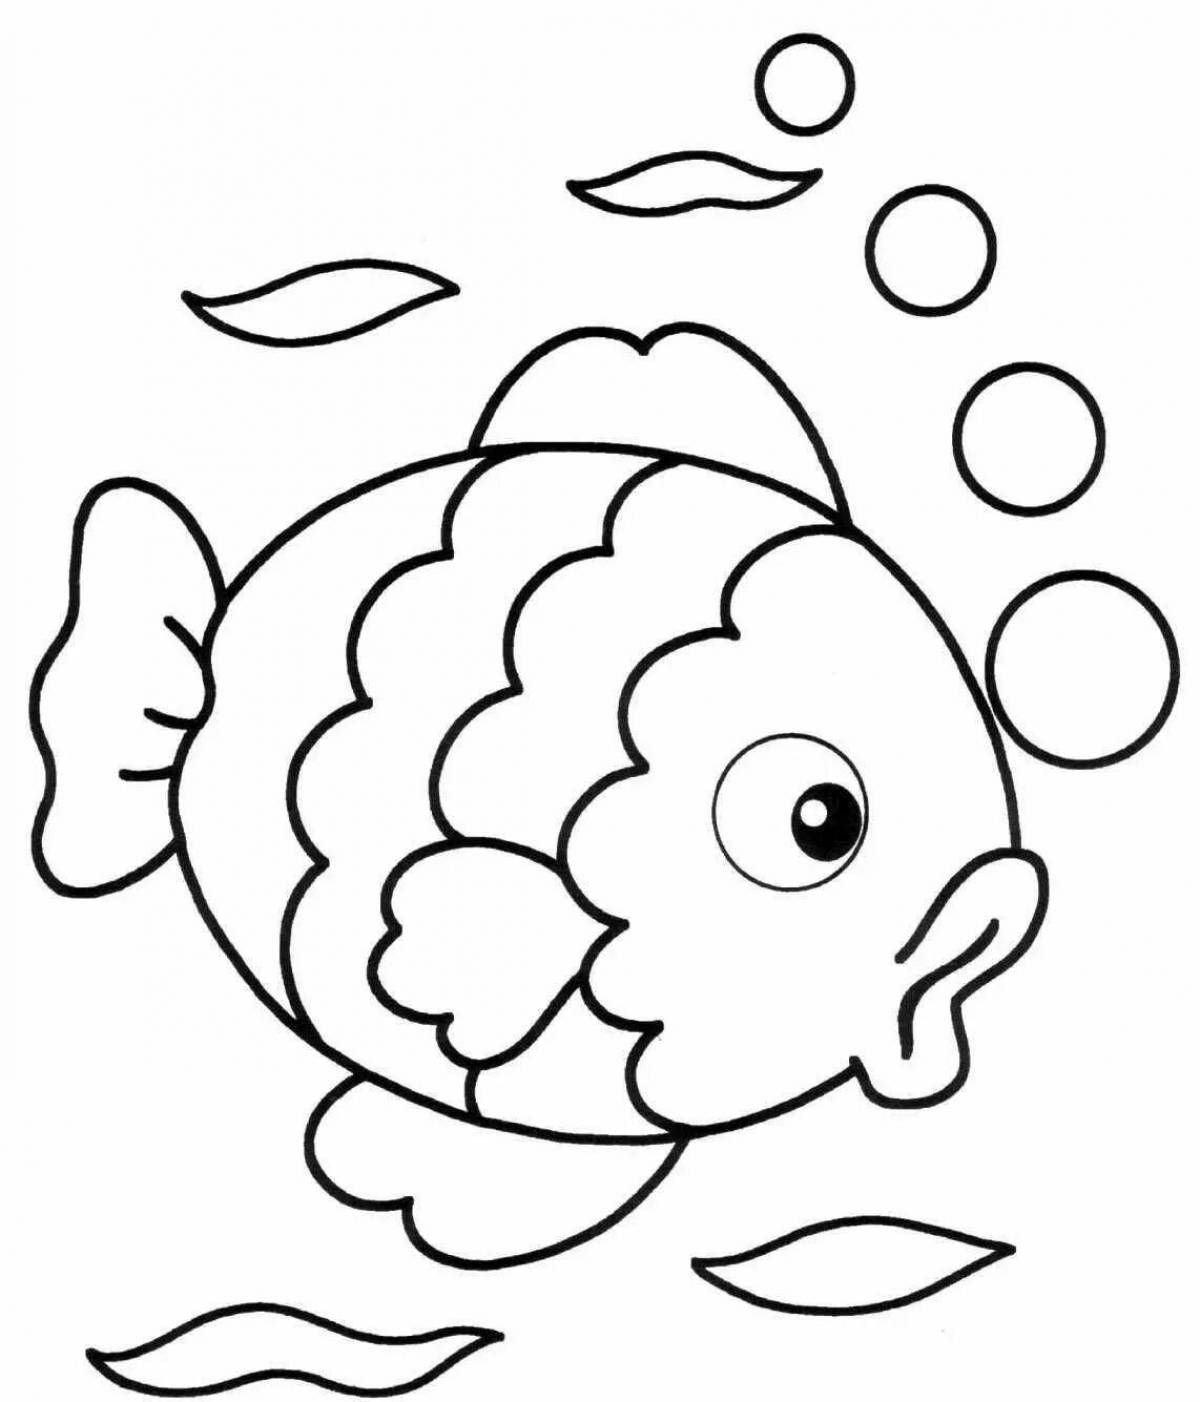 Adorable coloring book for 3-4 year olds